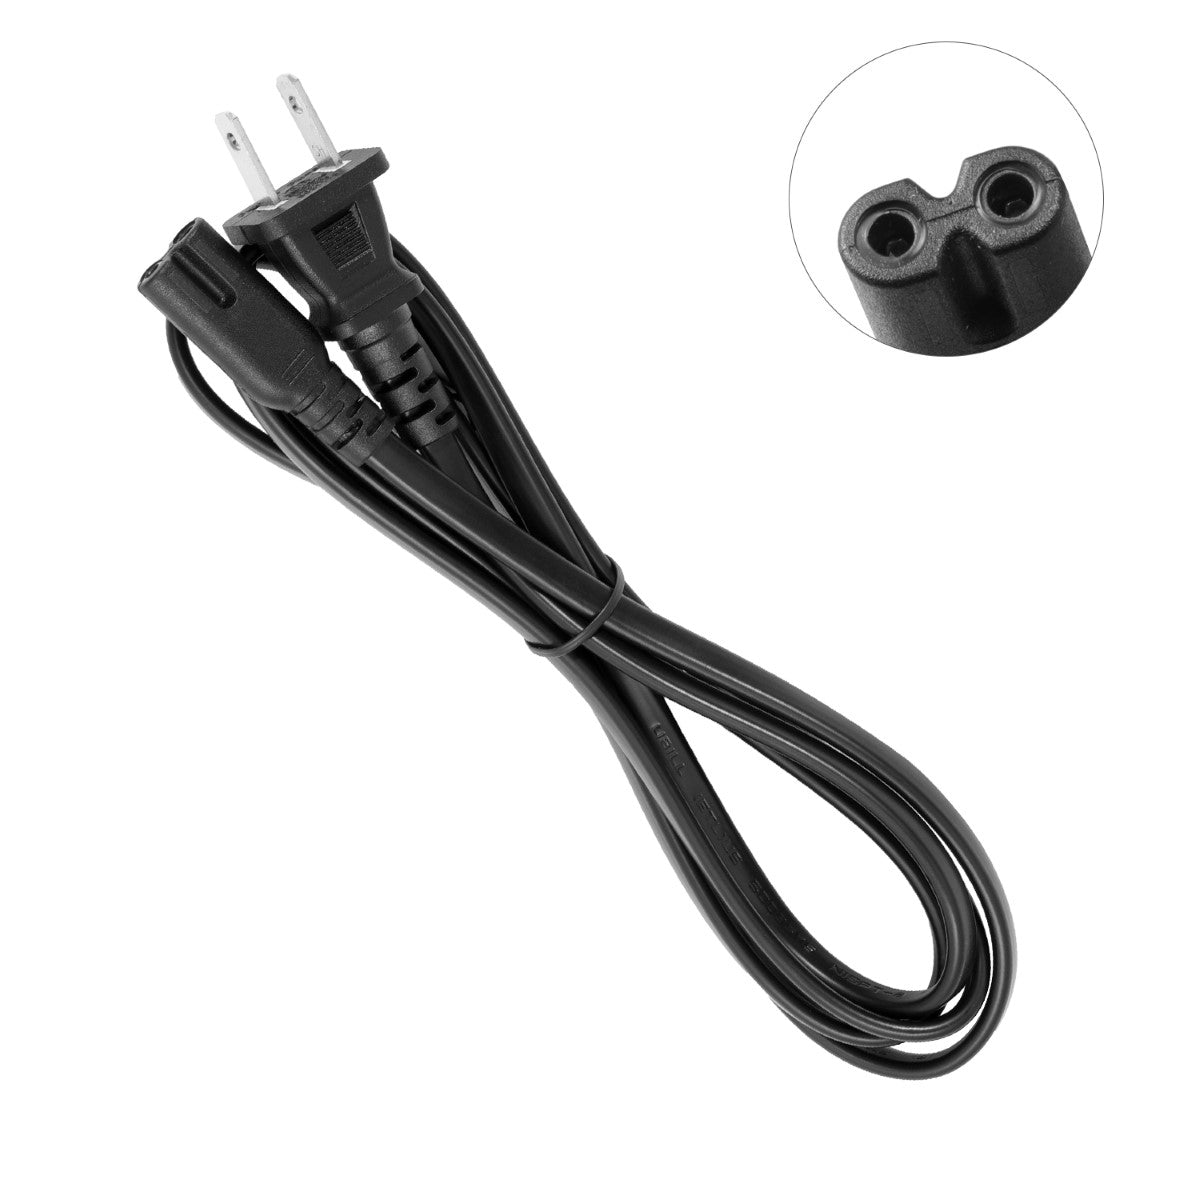 Power Cord for HP ENVY 5536 e-All-in-One Printer.